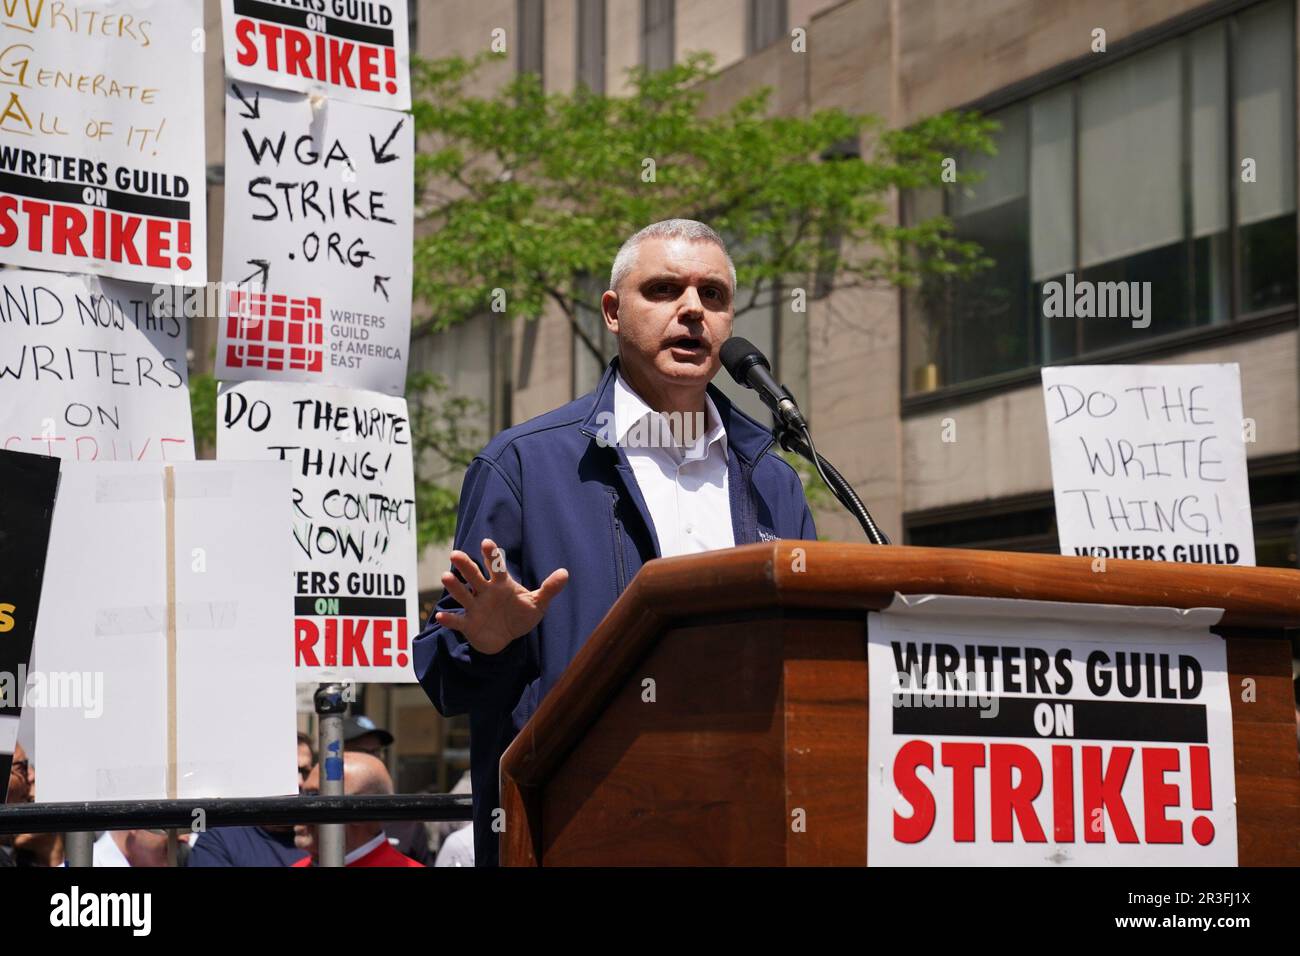 New York, NY, USA. 23rd May, 2023. Mario Cilento in attendance for The Writers Guild of America WGA Rally at the Rock, NBCUniversal offices at 30 Rock, New York, NY May 23, 2023. Credit: Kristin Callahan/Everett Collection/Alamy Live News Stock Photo